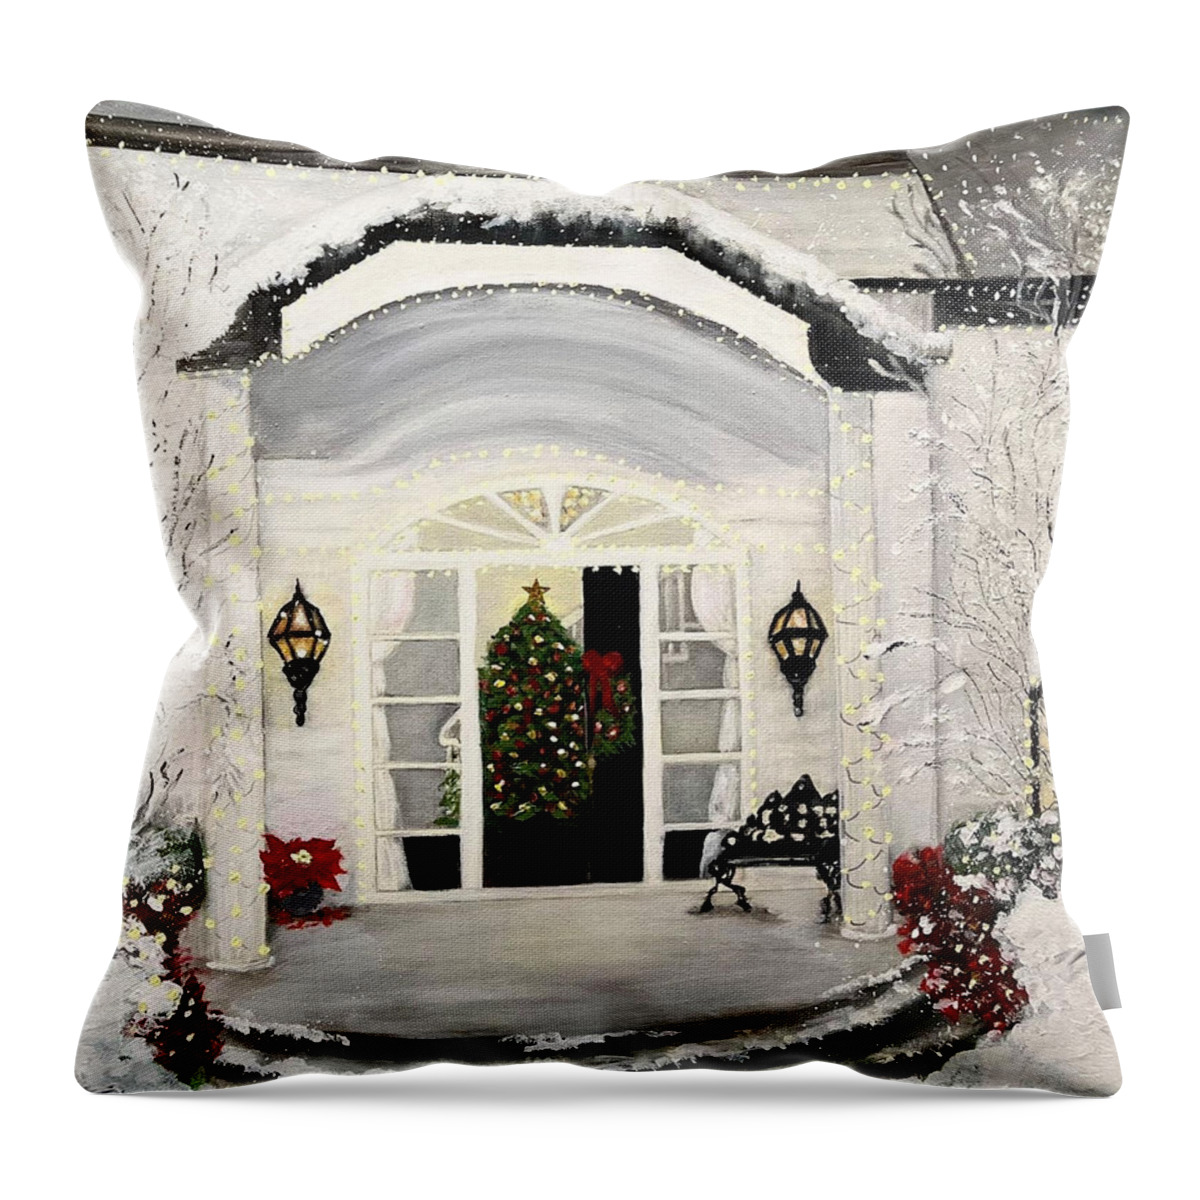 Home Throw Pillow featuring the painting Our Christmas Dreamhome by Juliette Becker